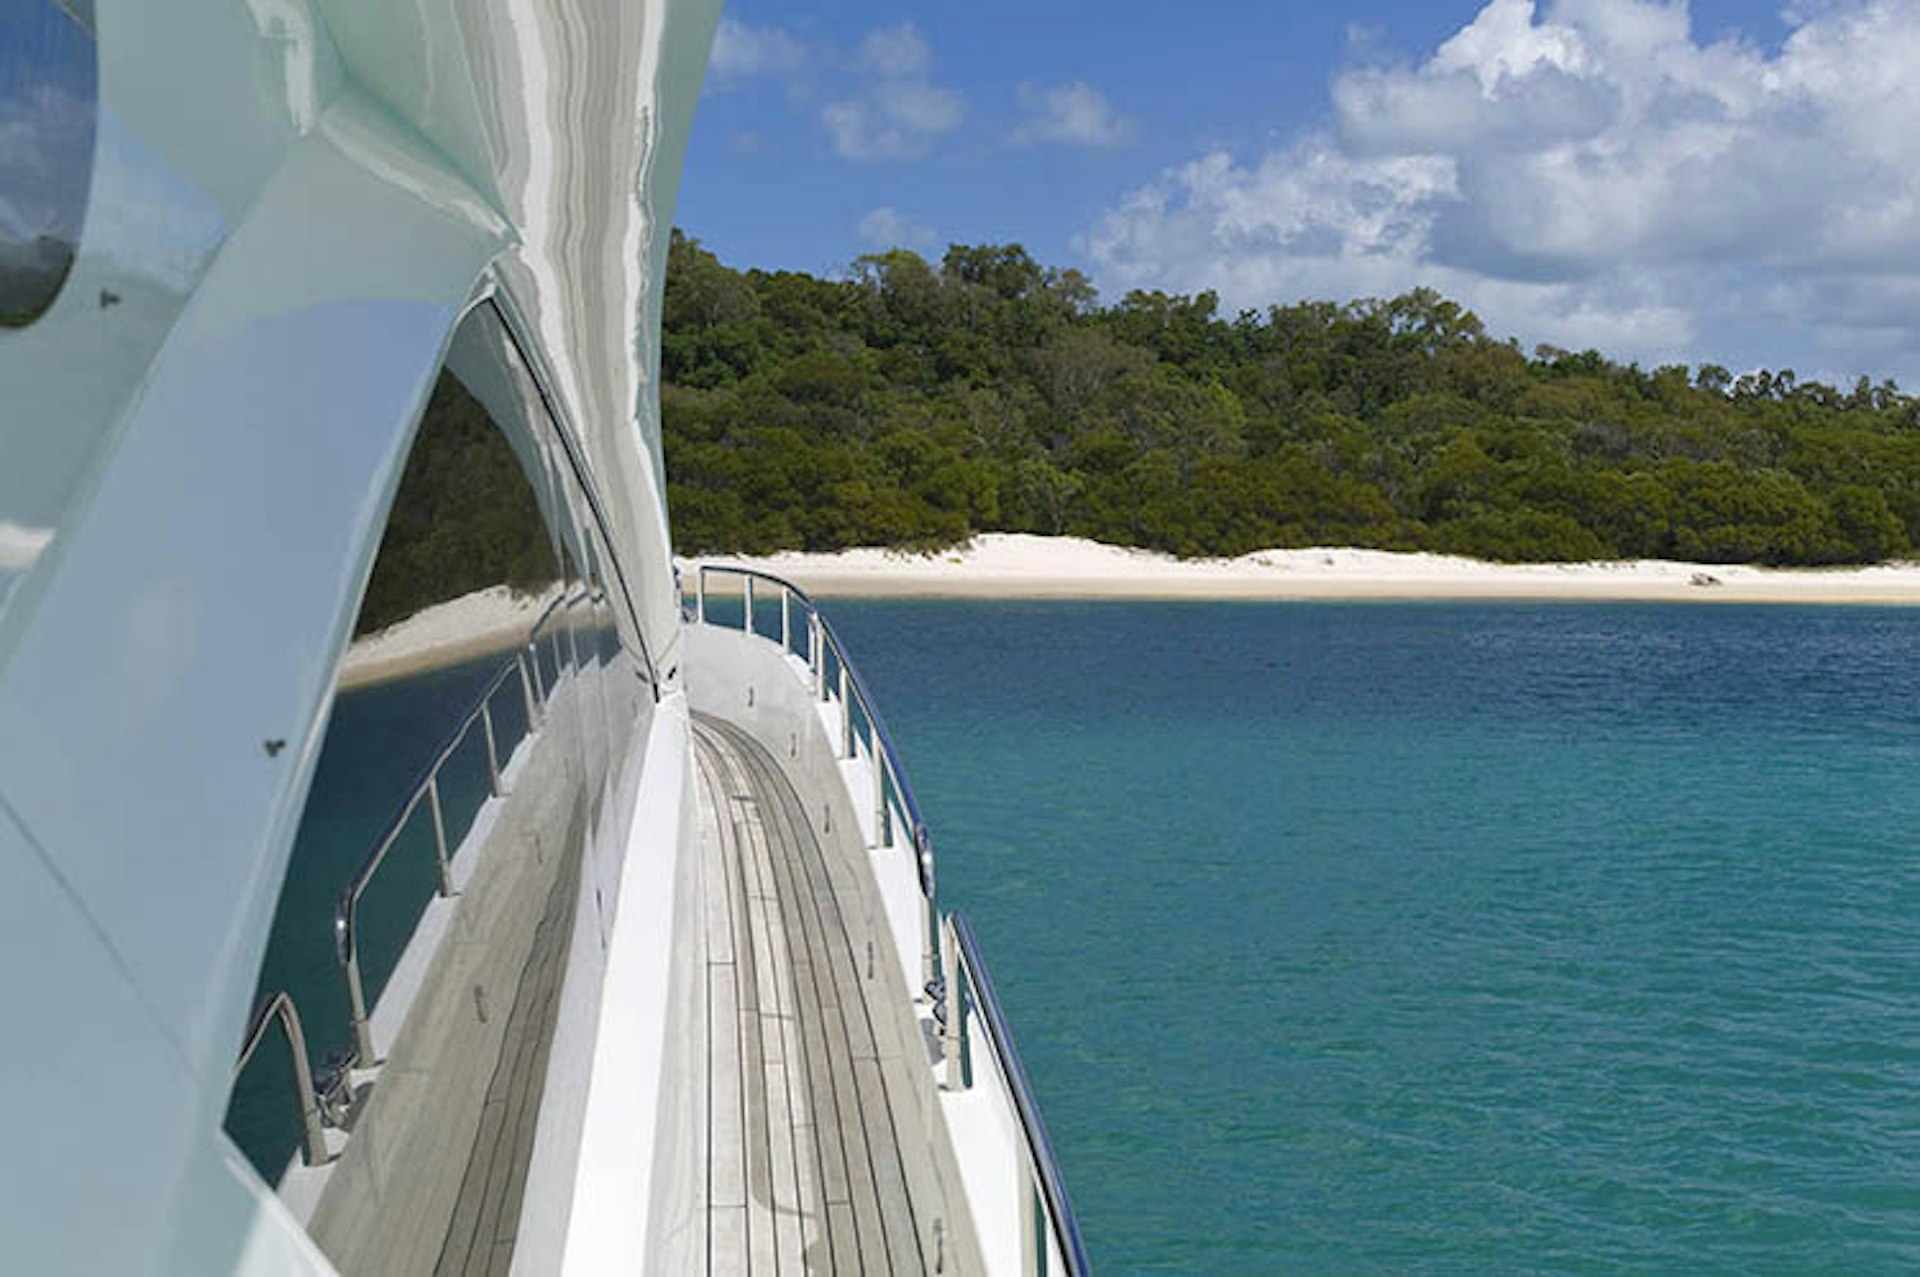 Sailing towards Whitehaven Beach in Australia's Whitsunday Islands. Image by Wayne Fogden / Photolibrary / Getty Images